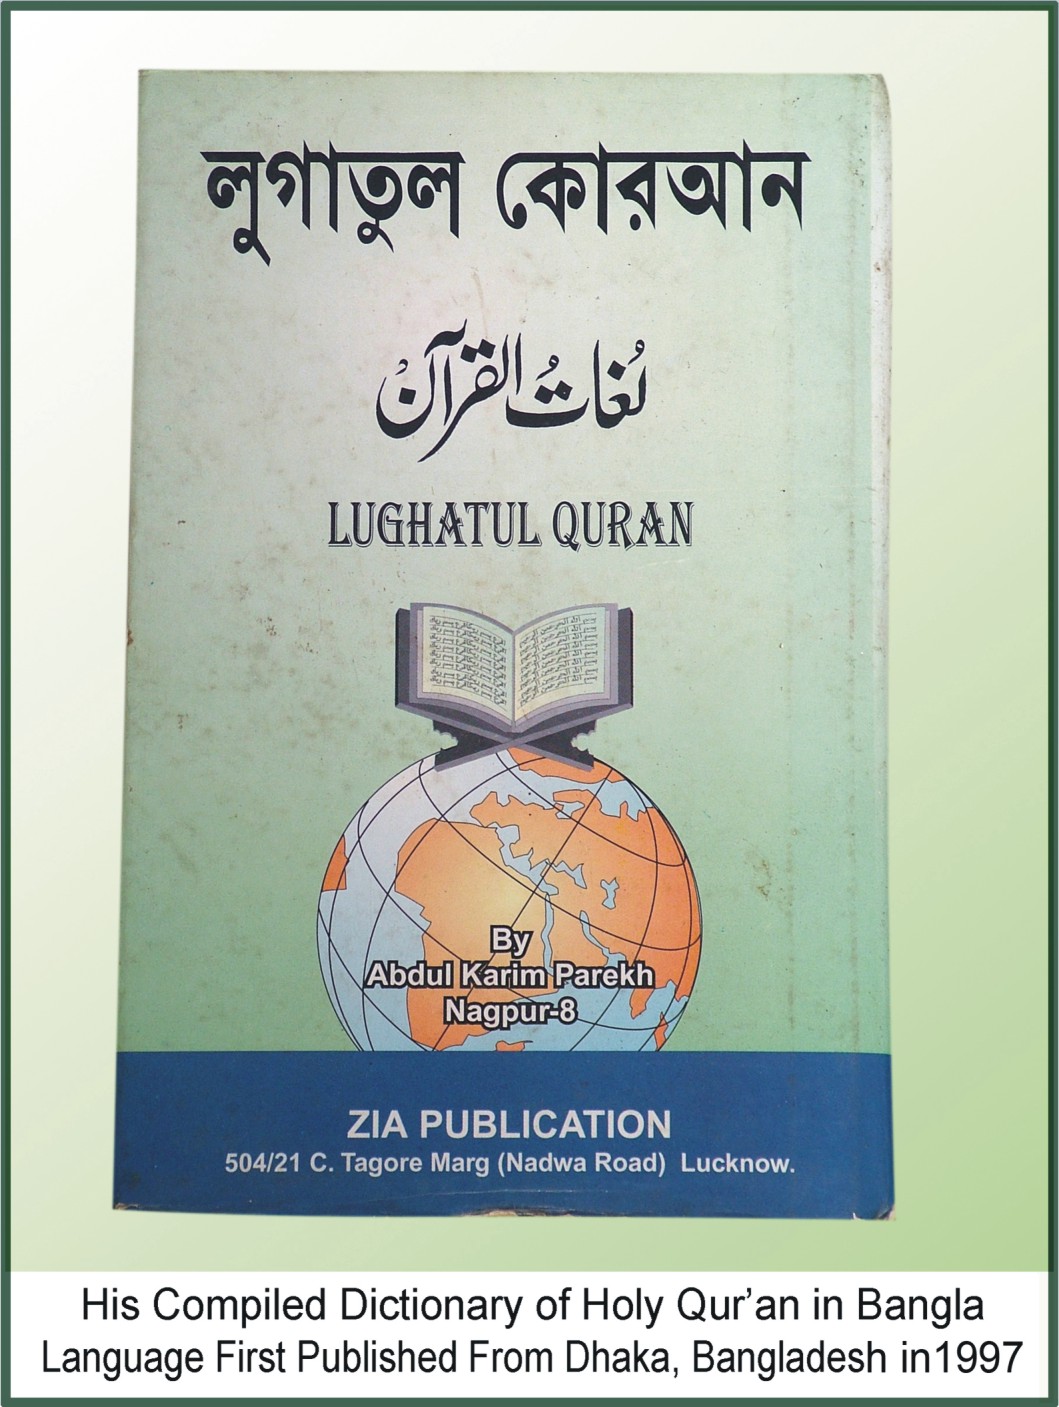 Compiled Dictionary of The Holy Qur'an (Bangla) First Published from Dhaka, Bangladesh in 1997